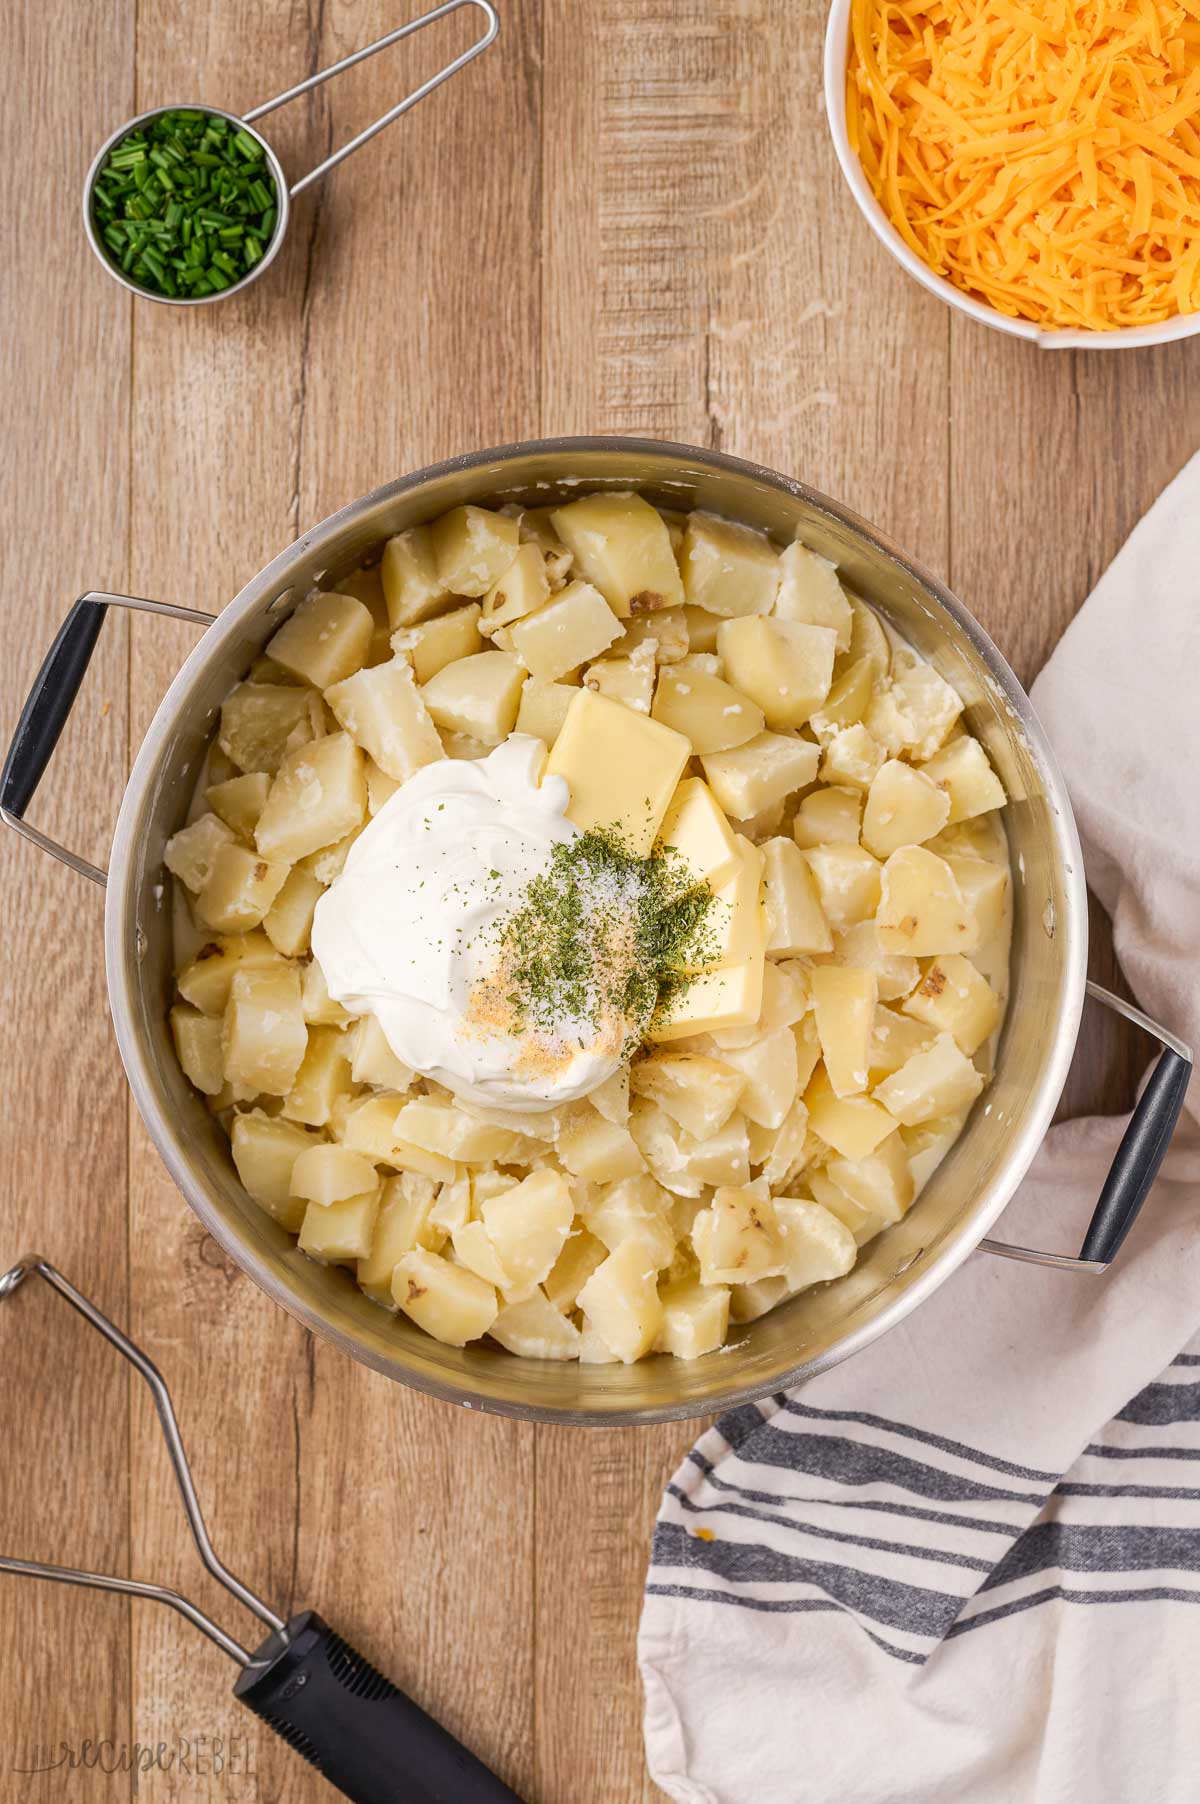 mashing potatoes with sour cream butter and seasoning